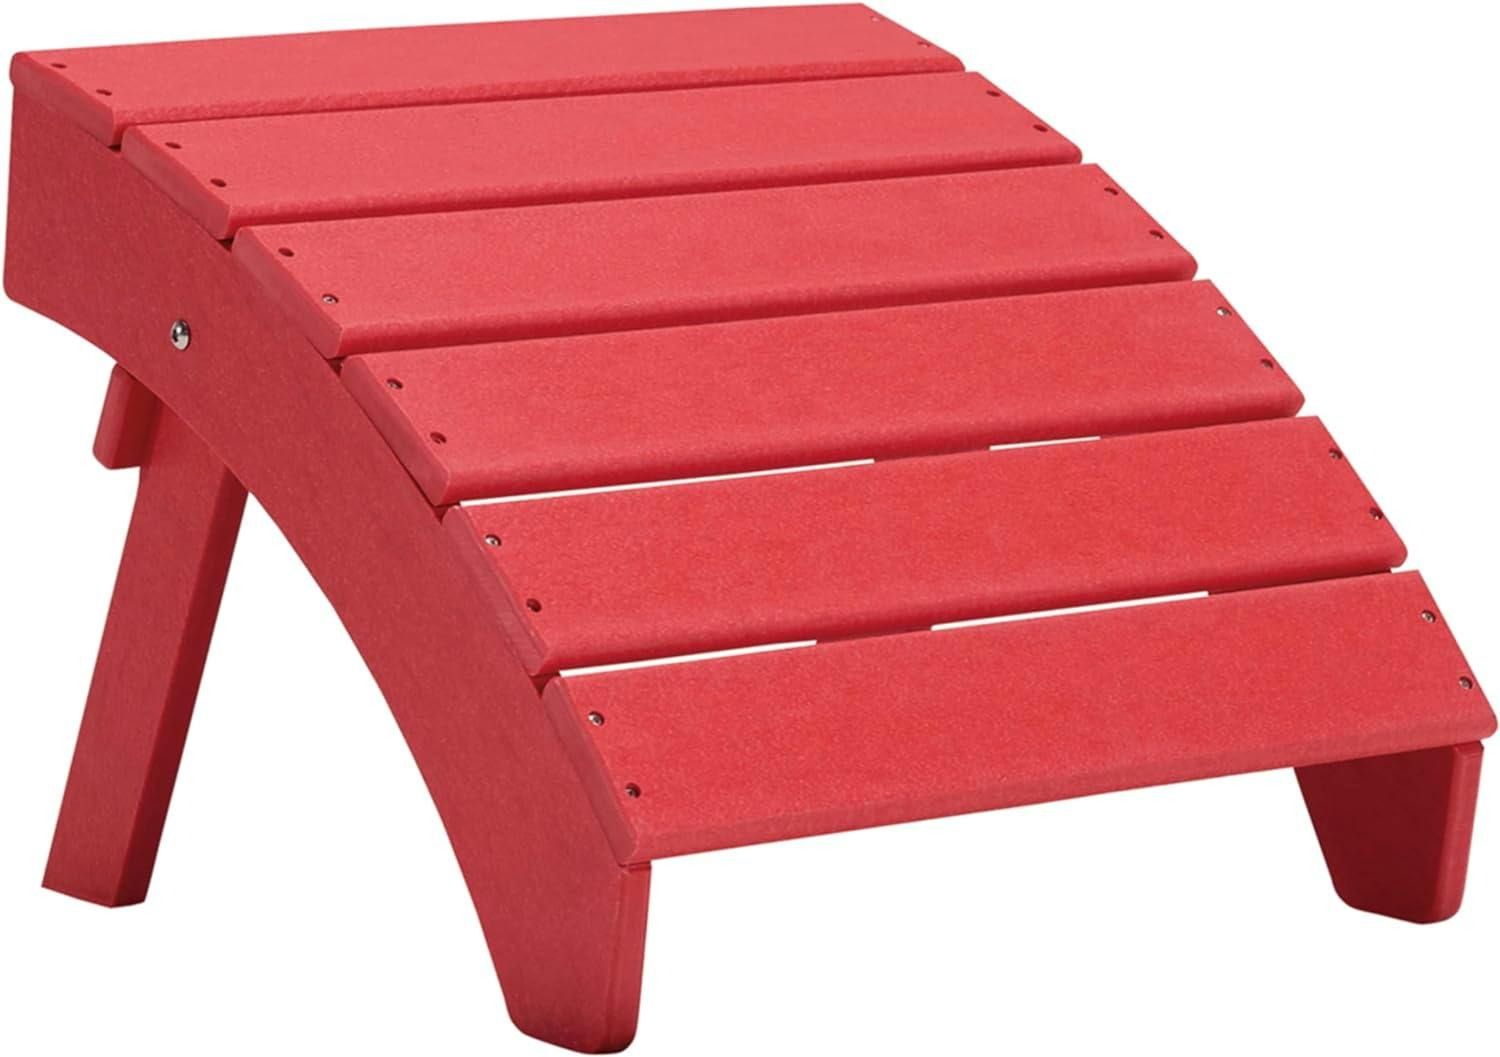 Cottage-Quaint Red HDPE Outdoor Ottoman with Slatted Design